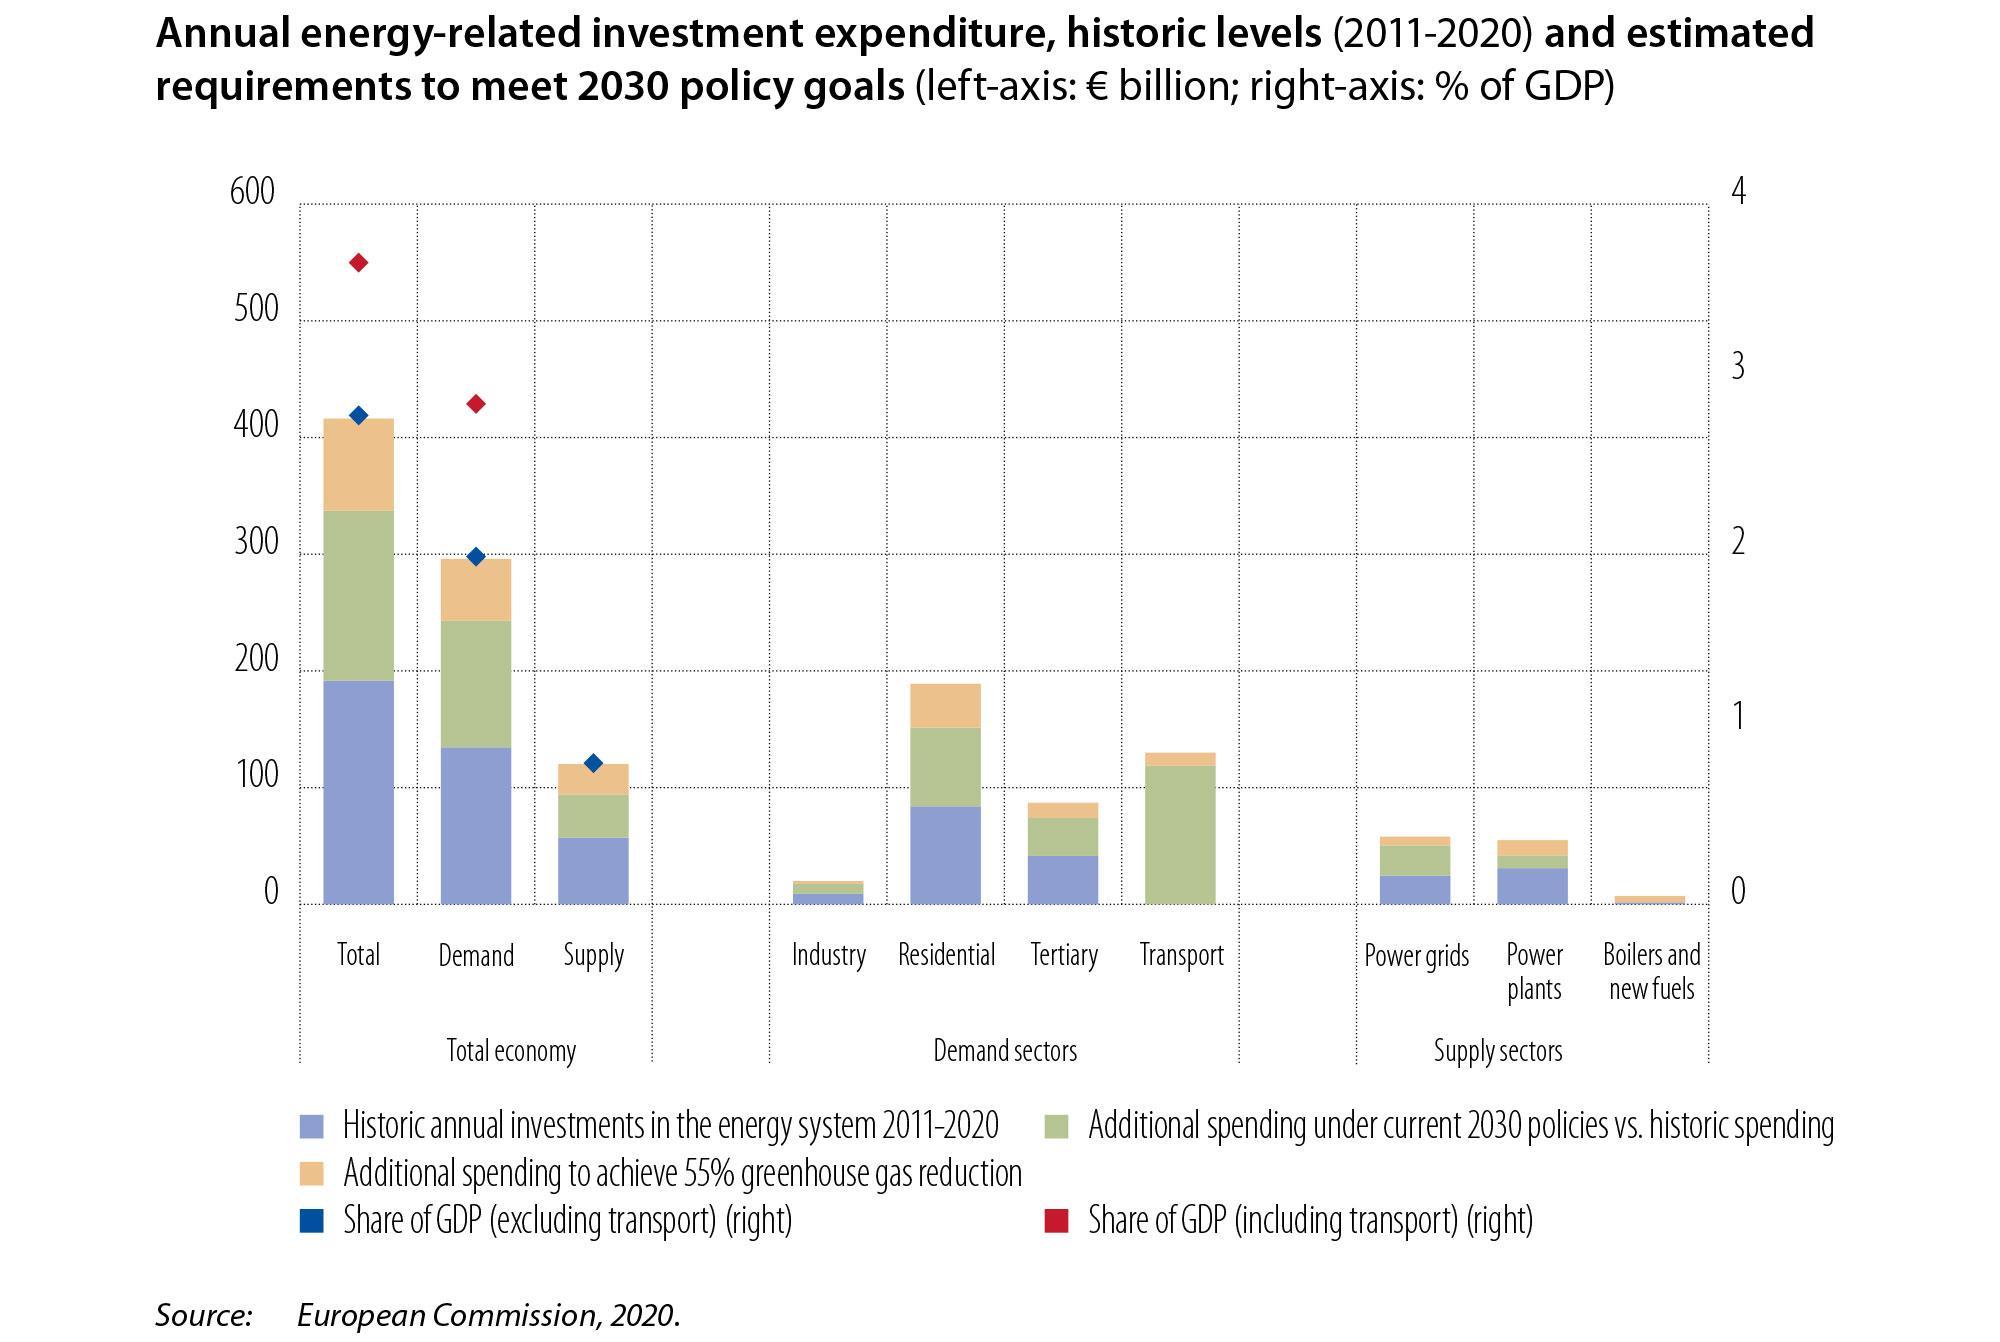 Annual energy-related investment expenditure, historic levels (2011 - 2020) and estimated requirements to meet 2030 policy goals (left-axis: € billion, right-axis: % of GDP)